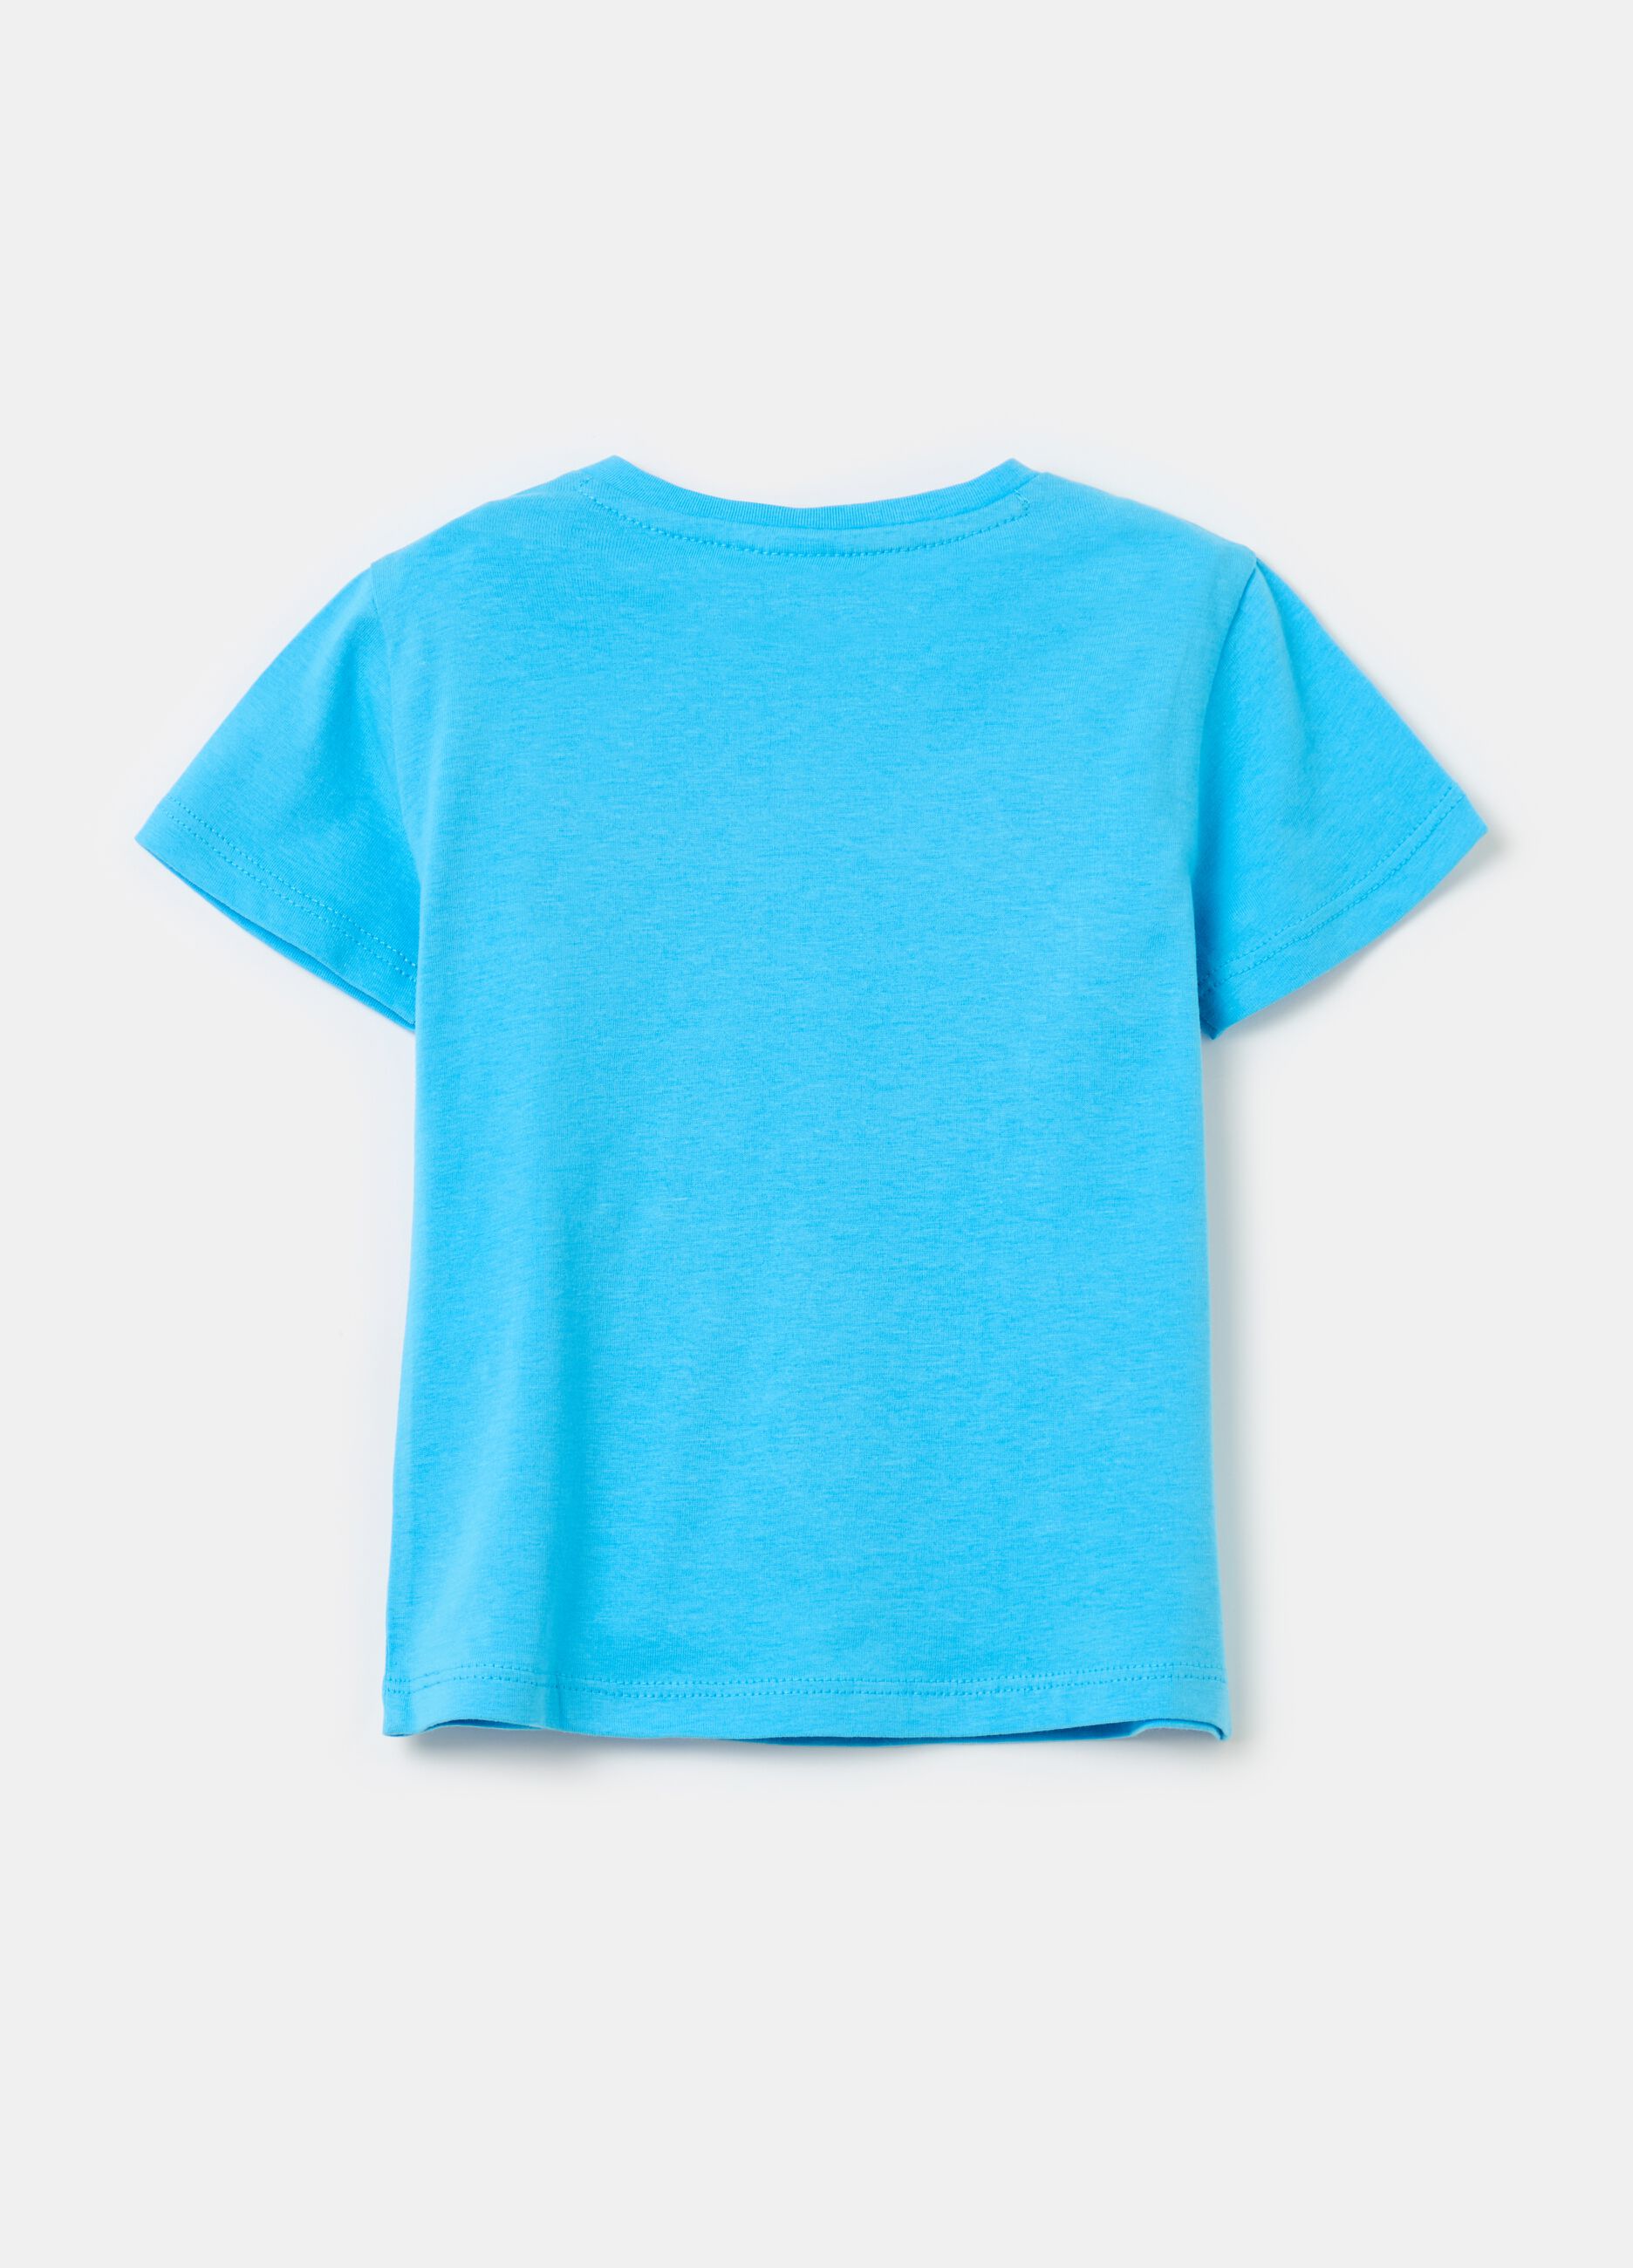 Cotton T-shirt with small snails patch